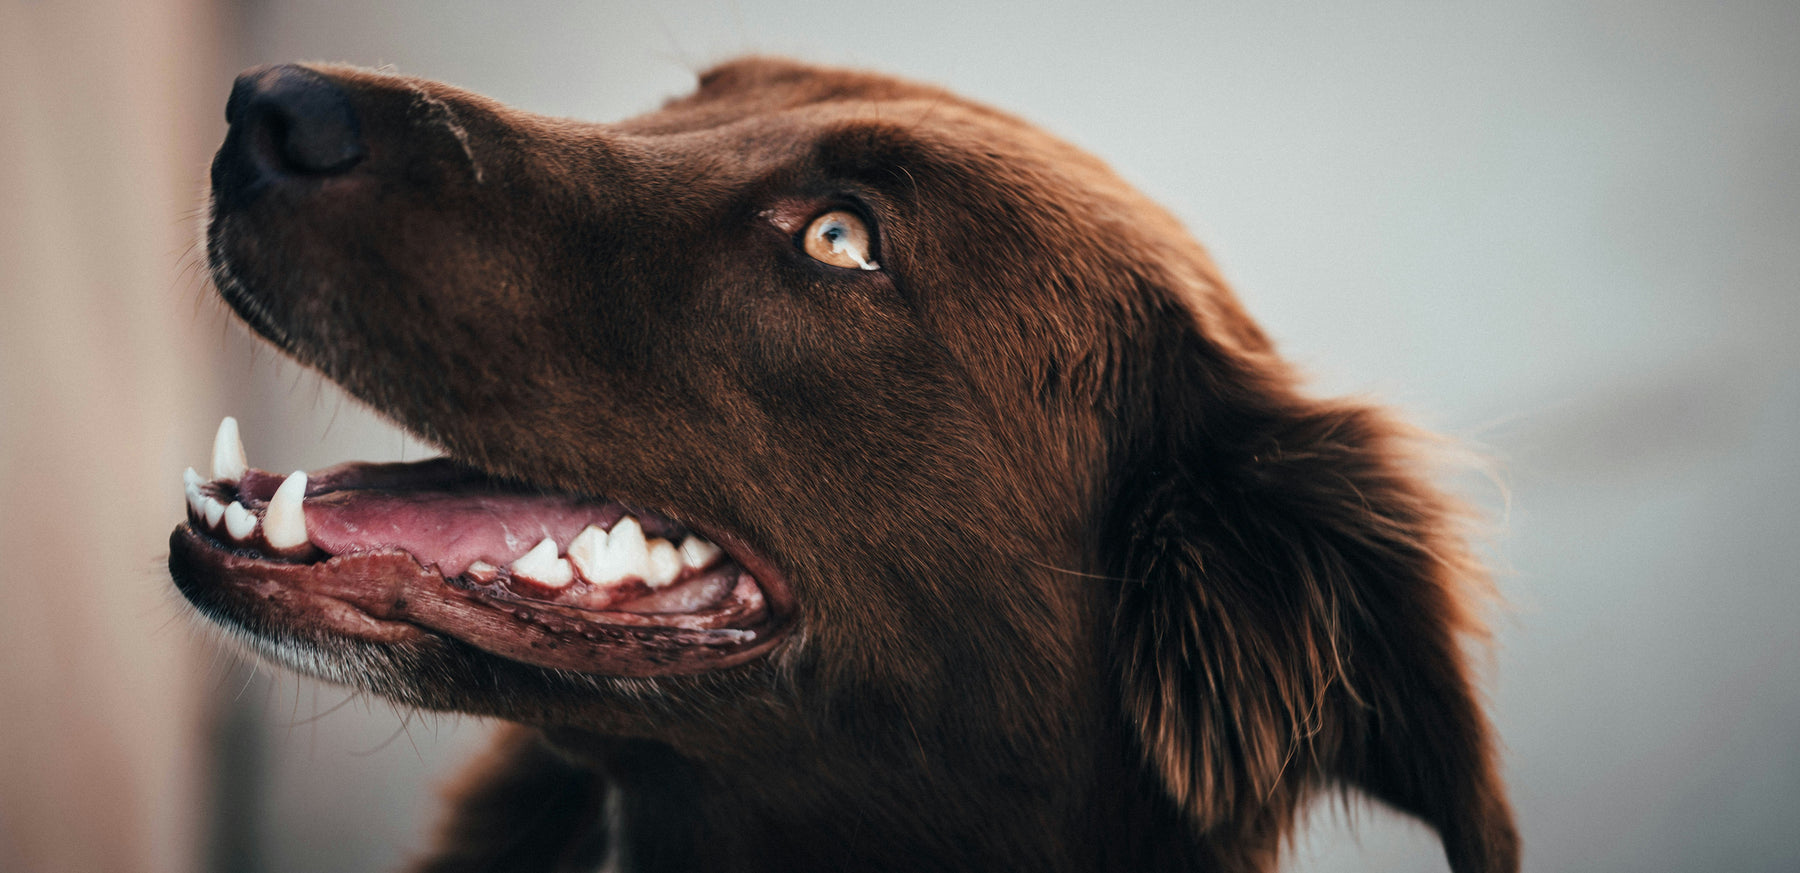 Canine Dental Care- How To Look After Your Dogs Teeth